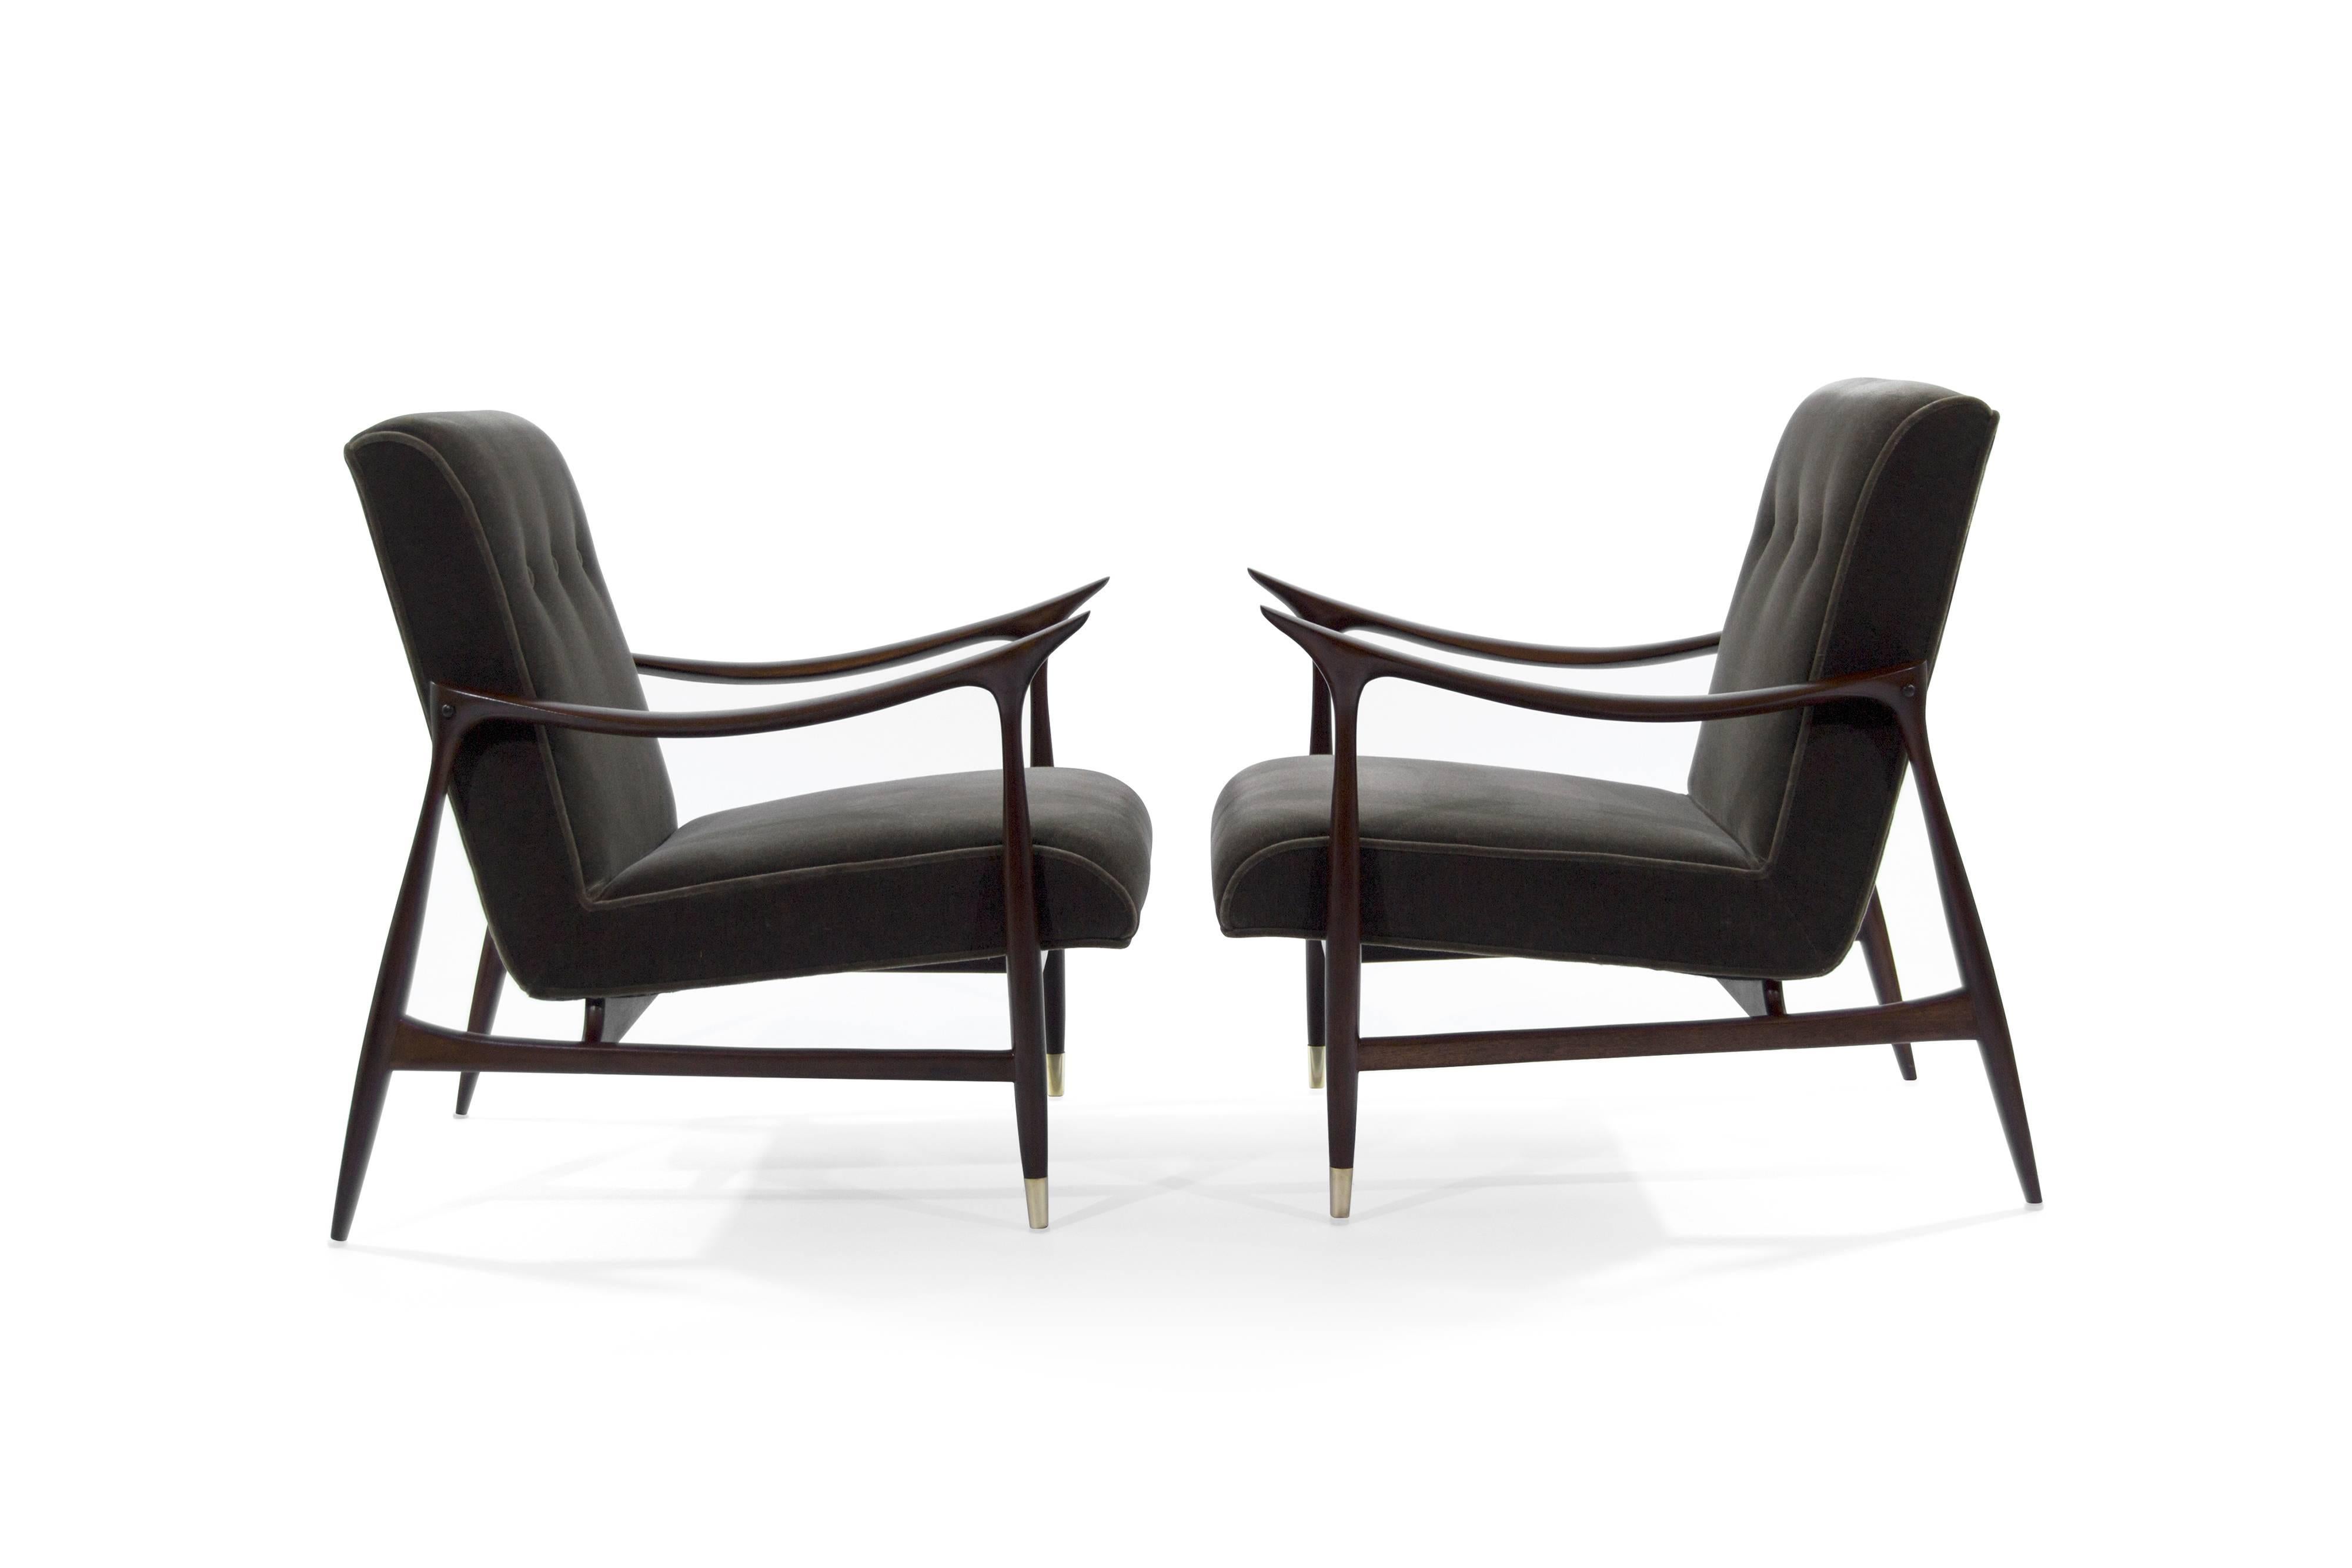 Absolutely stunning pair of Jorge Zalszupin inspired lounge chairs featuring fully restored sculptural frames in Brazilian jangada wood. Newly upholstered in charcoal mohair. Brass sabots newly polished.